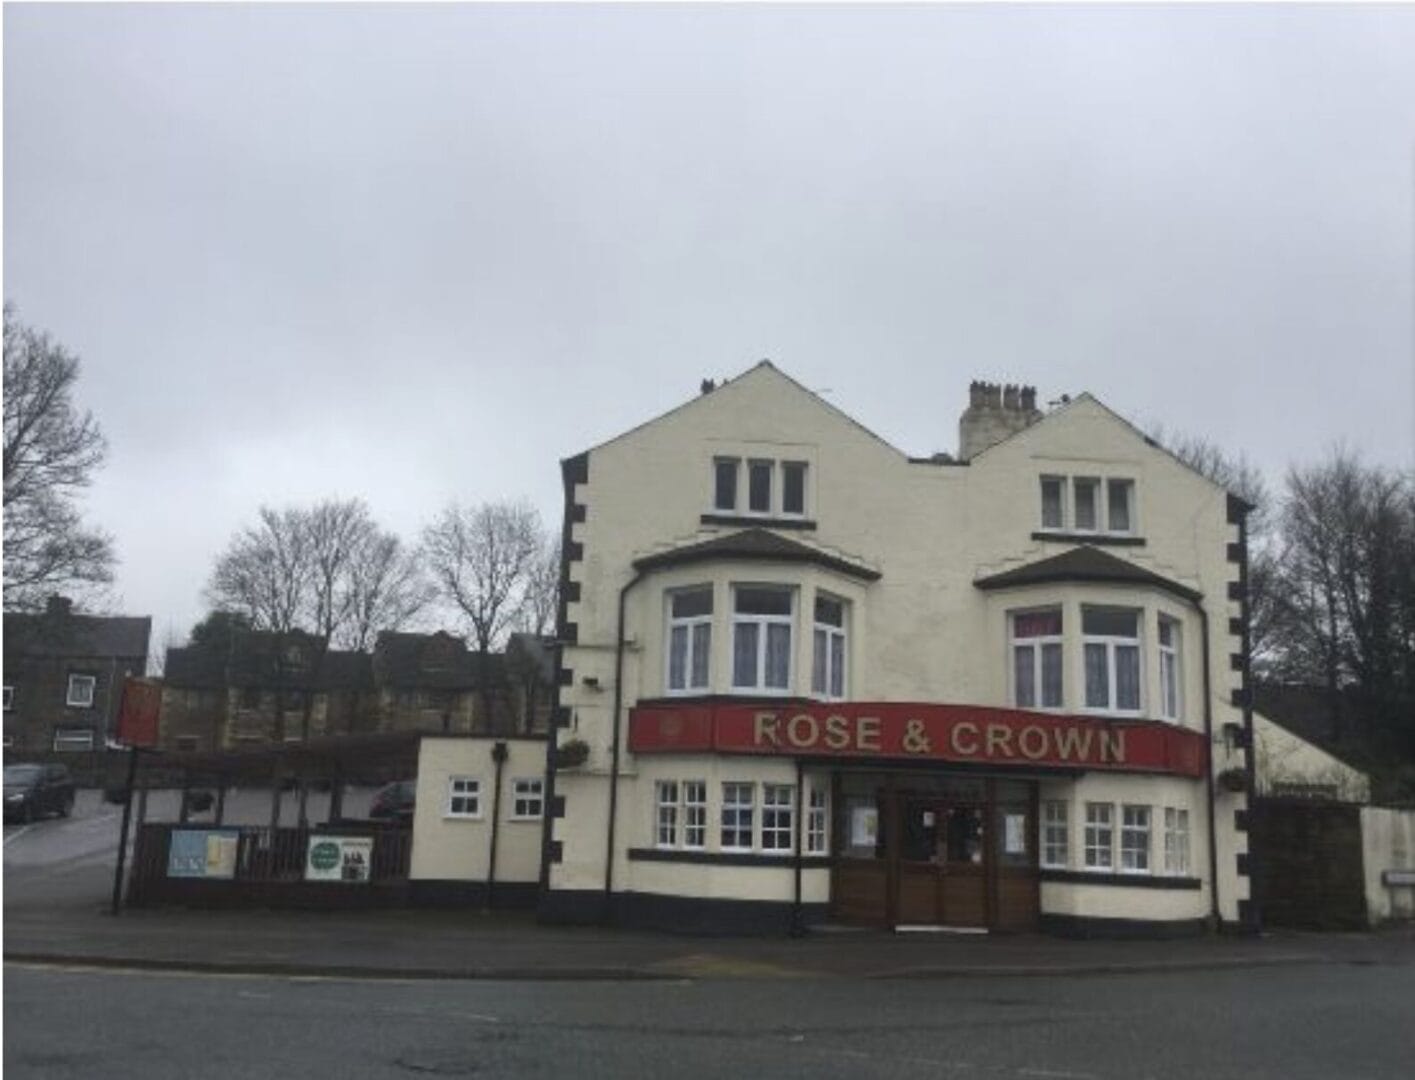 Let A Pub In Barnsley – Run The Rose & Crown !